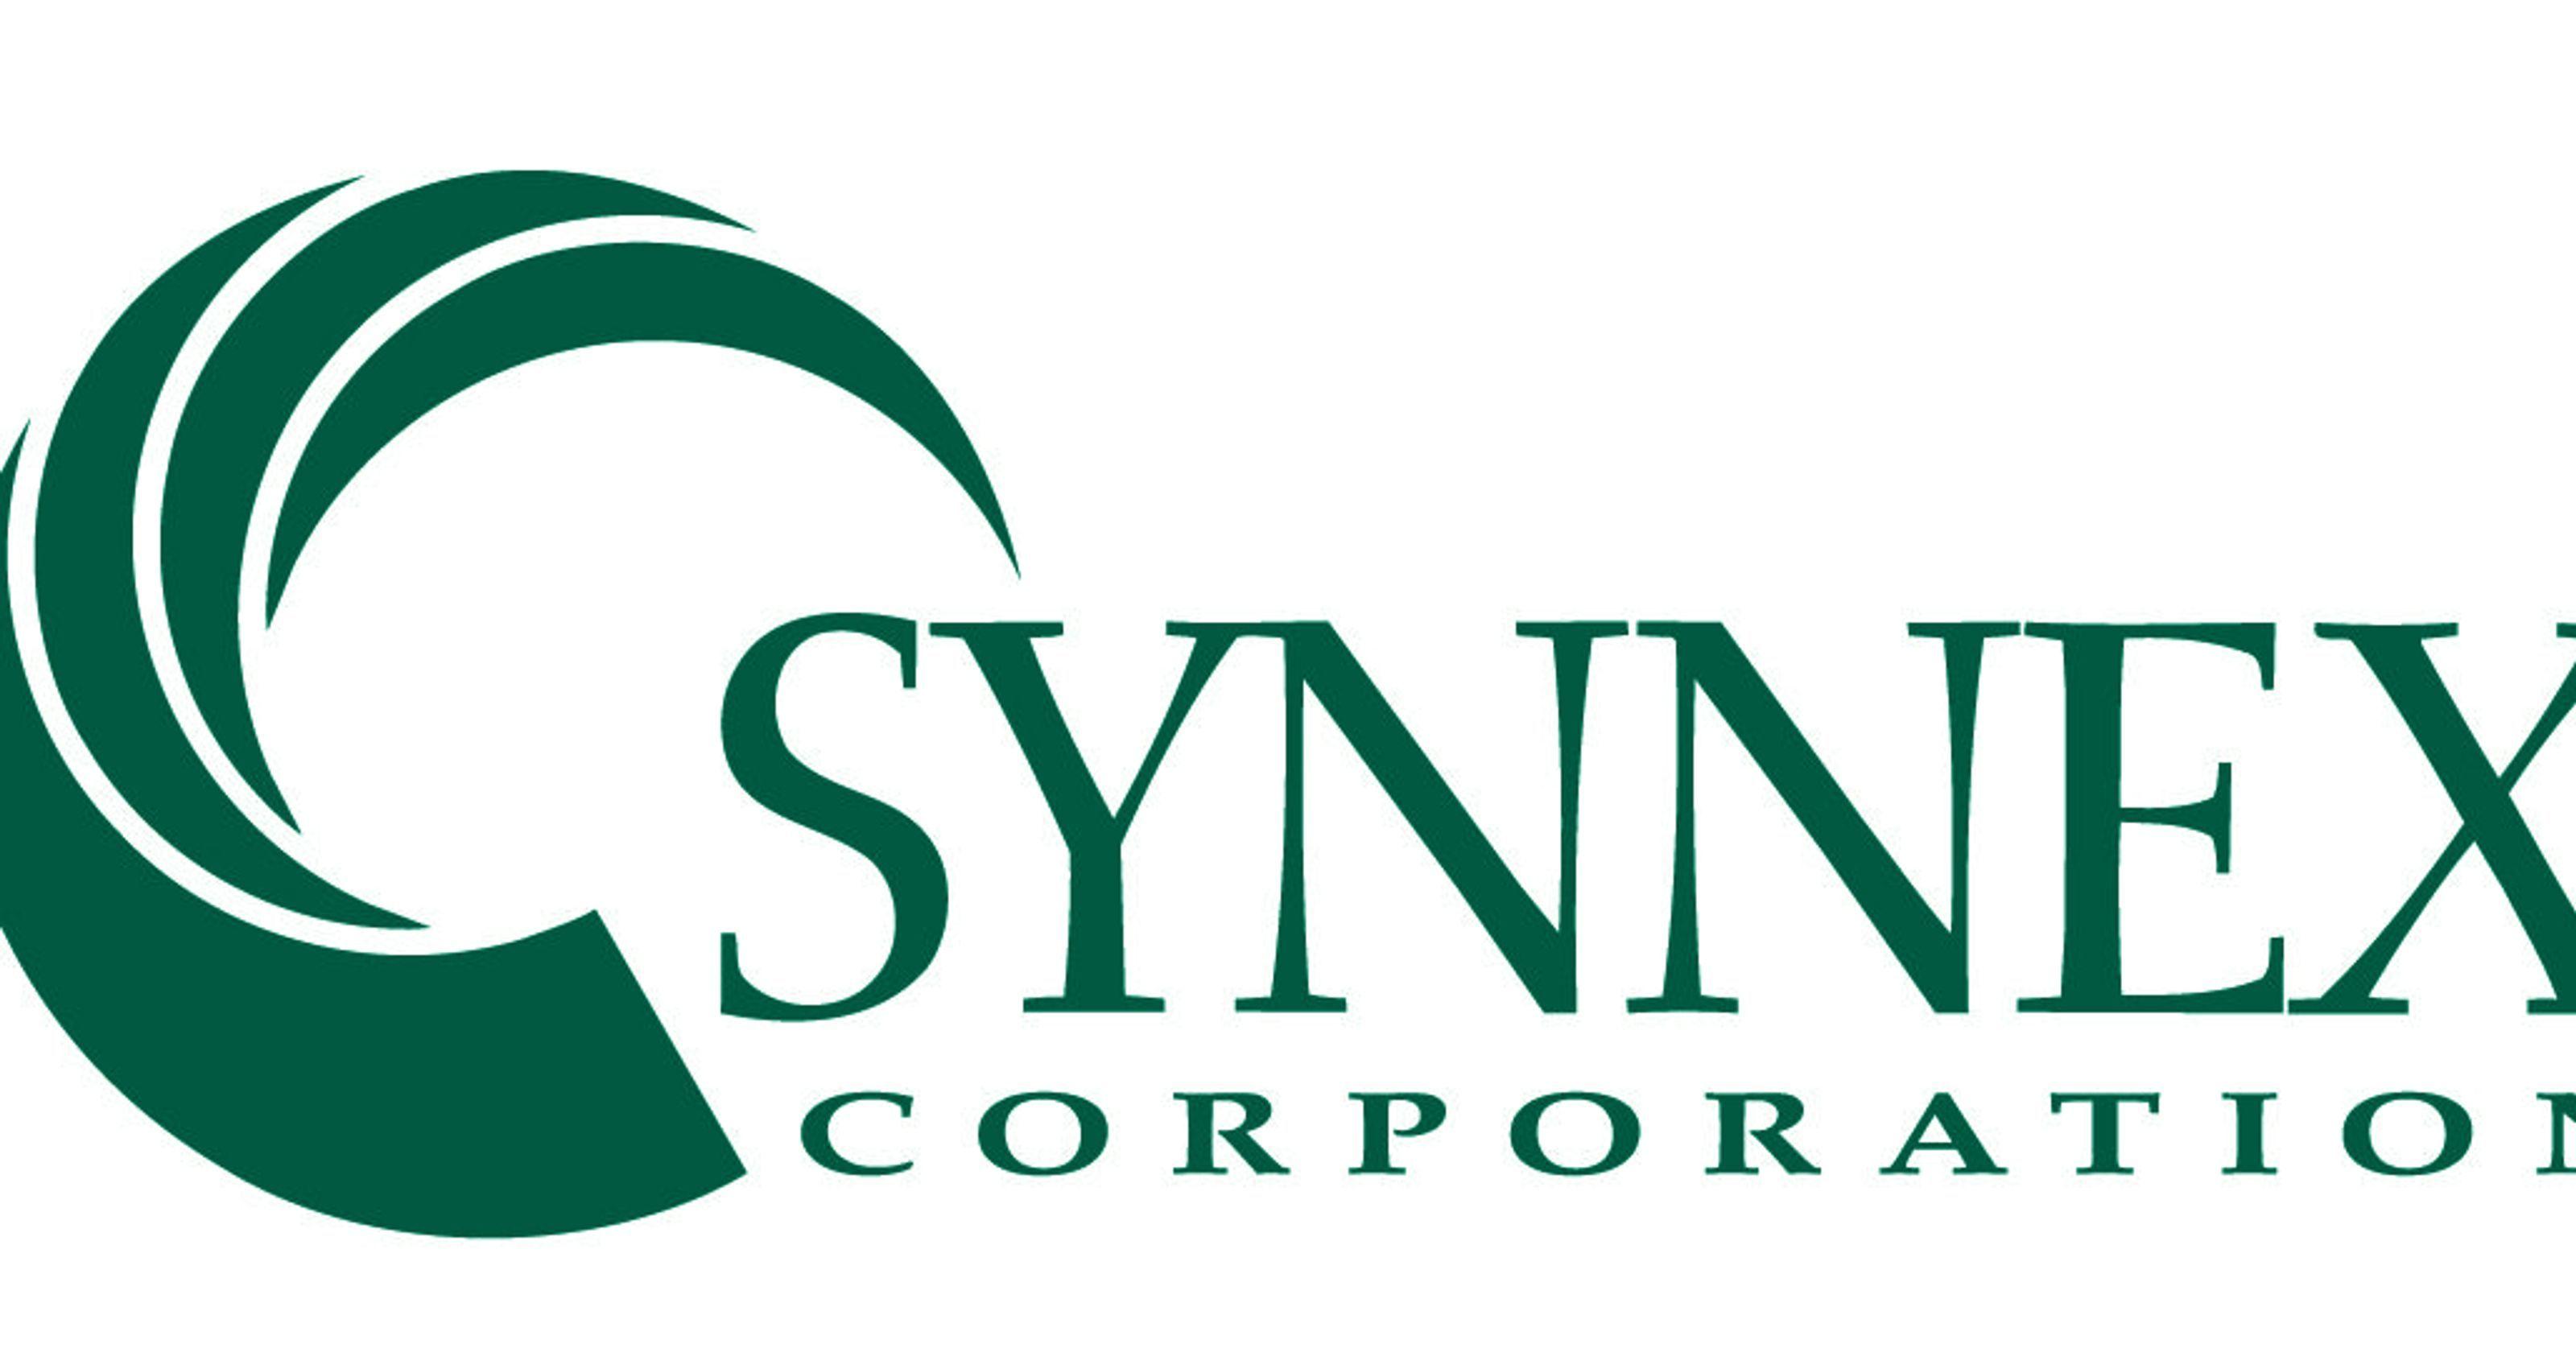 SYNNEX Corp Logo - SYNNEX plans to create 600 new jobs over next five years in expansion